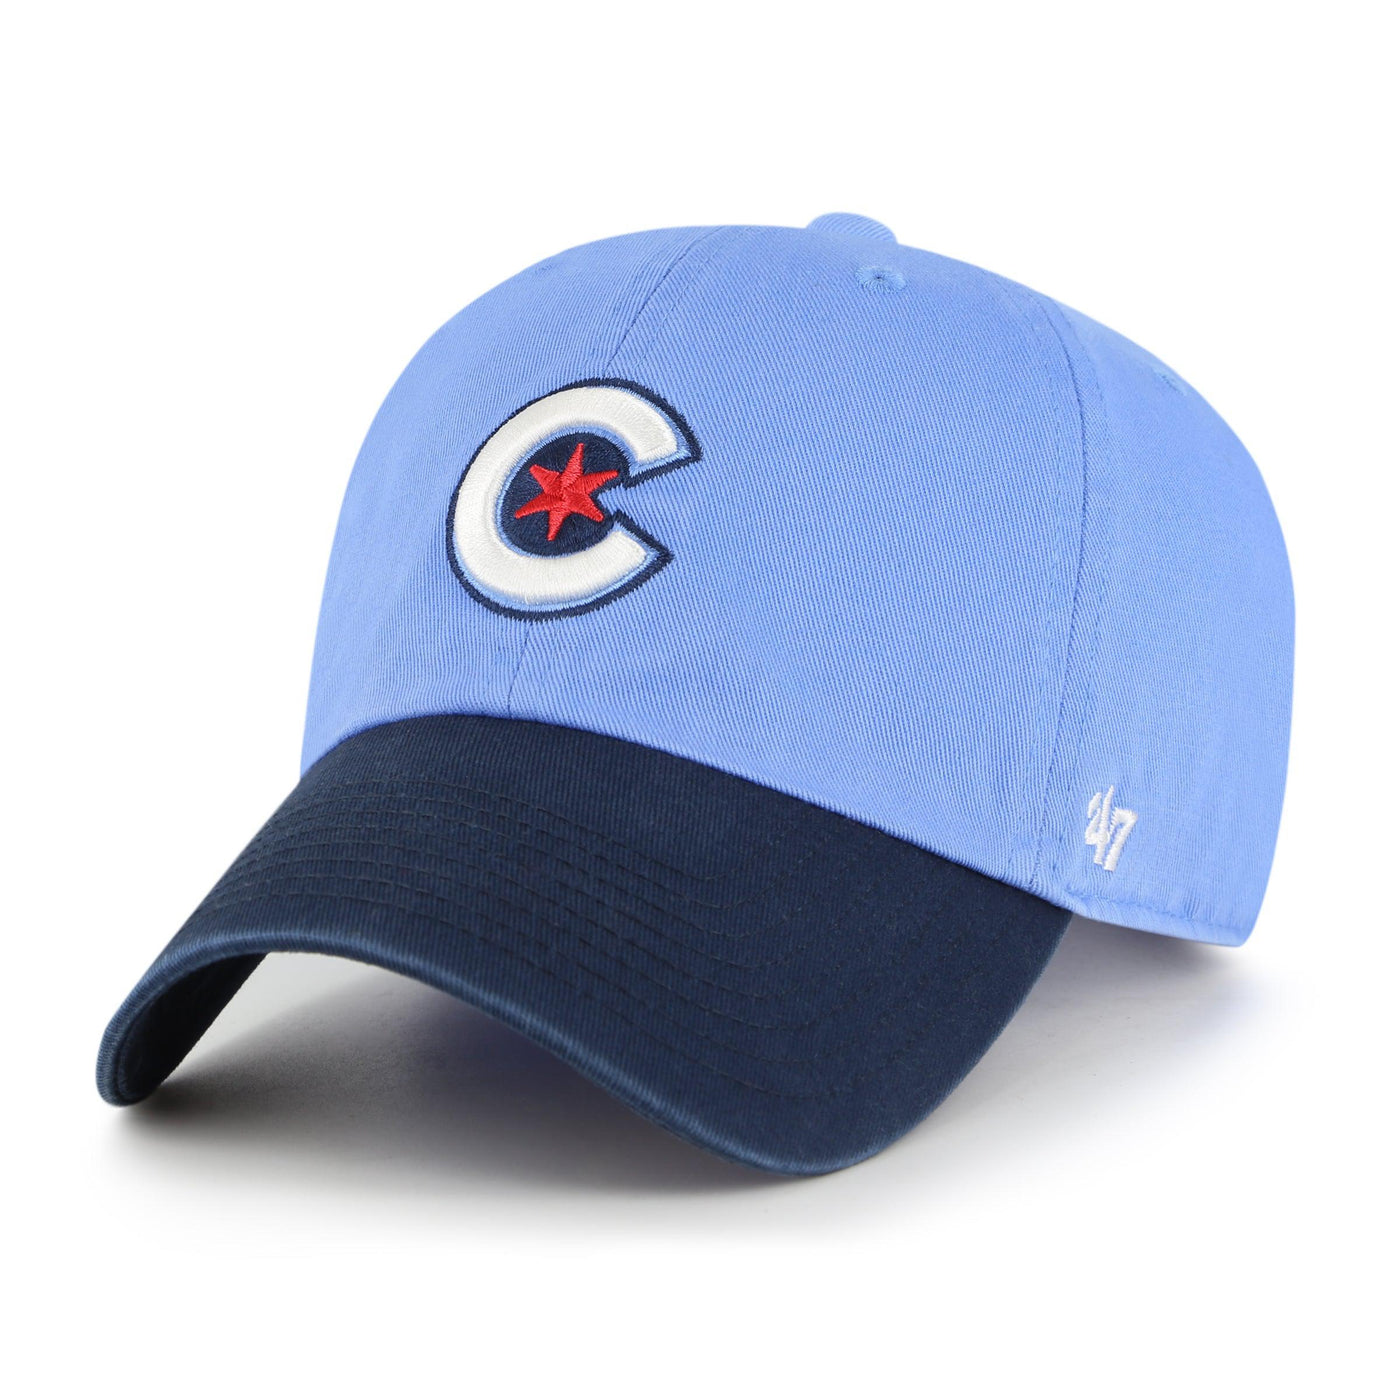 CHICAGO CUBS 47 BRAND CITY CONNECT REVERSE CLEAN UP CAP